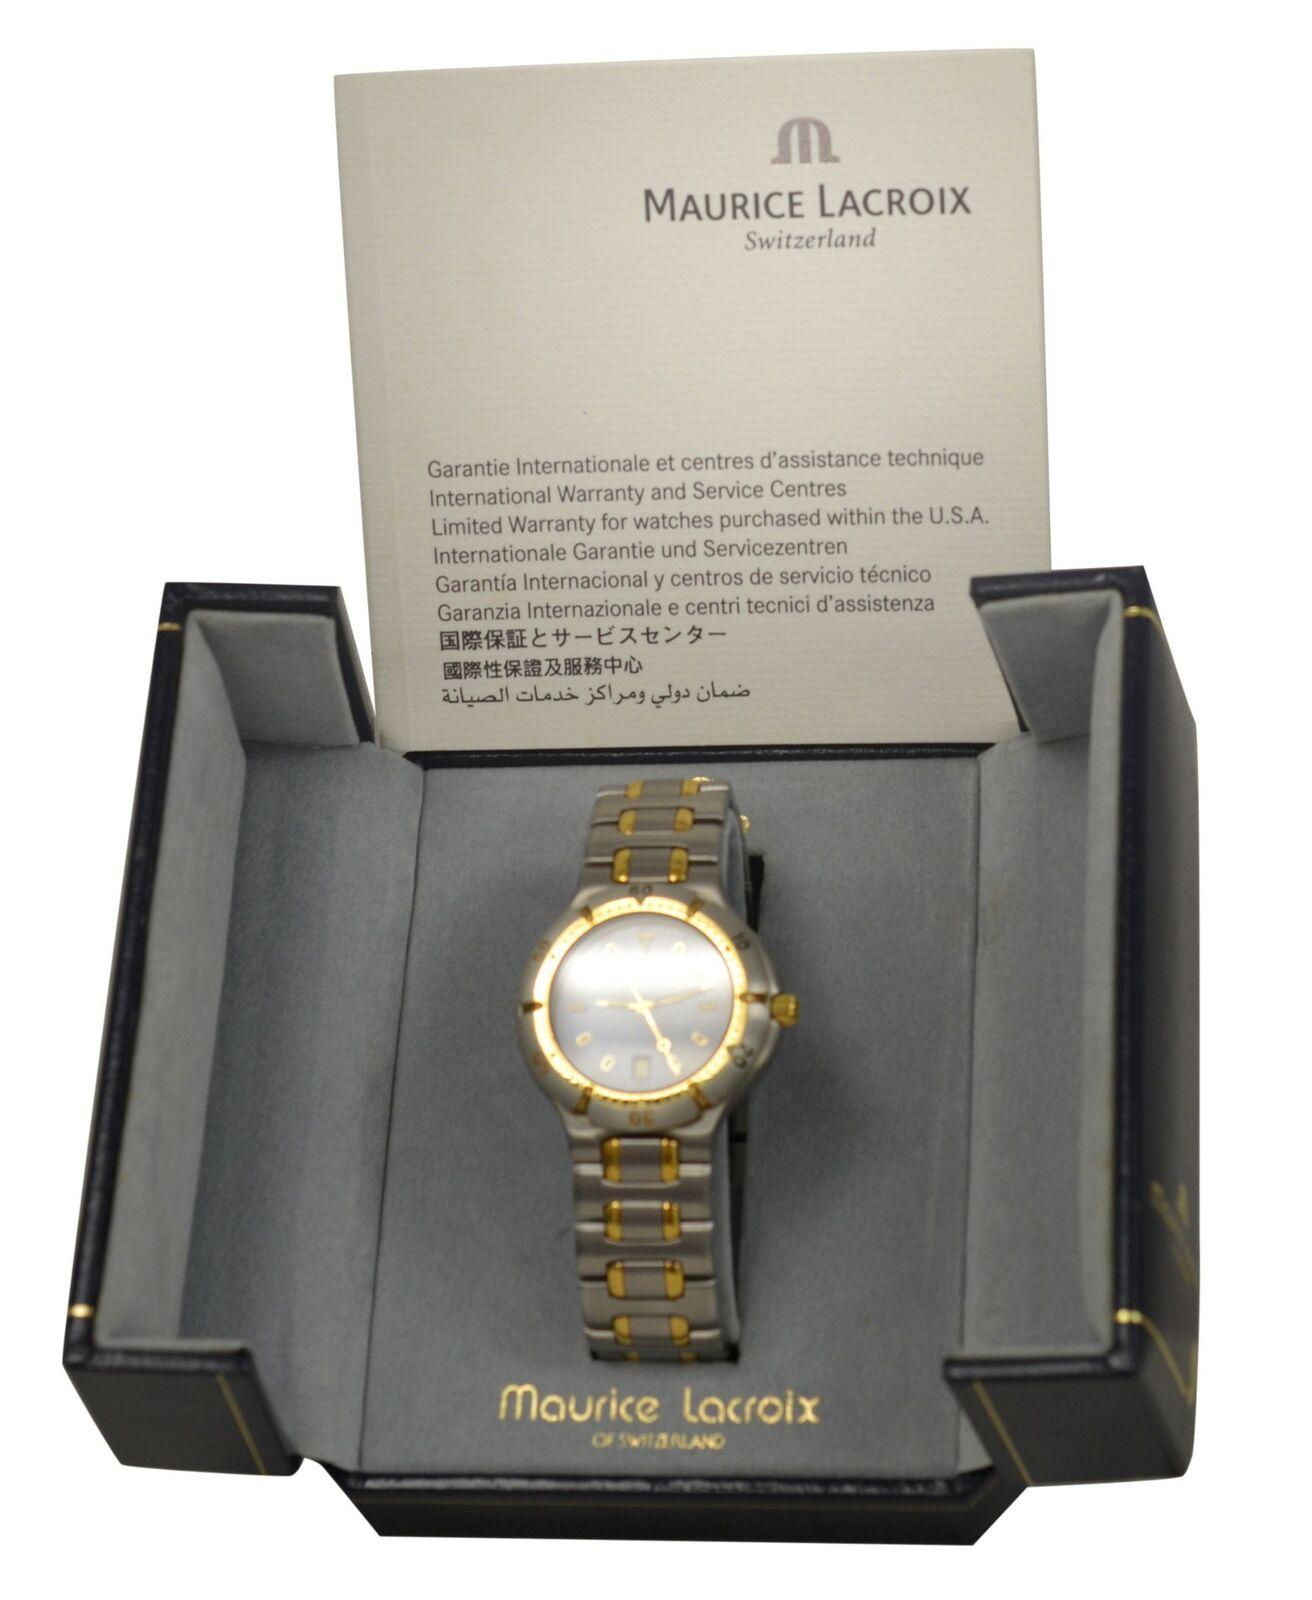 Brand	Maurice Lacroix
Model	92266
Gender	Ladies'
Condition	New Old Stock Store display
Movement	Swiss Quartz
Case Material	Gold Electroplated Stainless Steel
Bracelet / Strap Material	
Gold Electroplated Stainless Steel

Clasp / Buckle